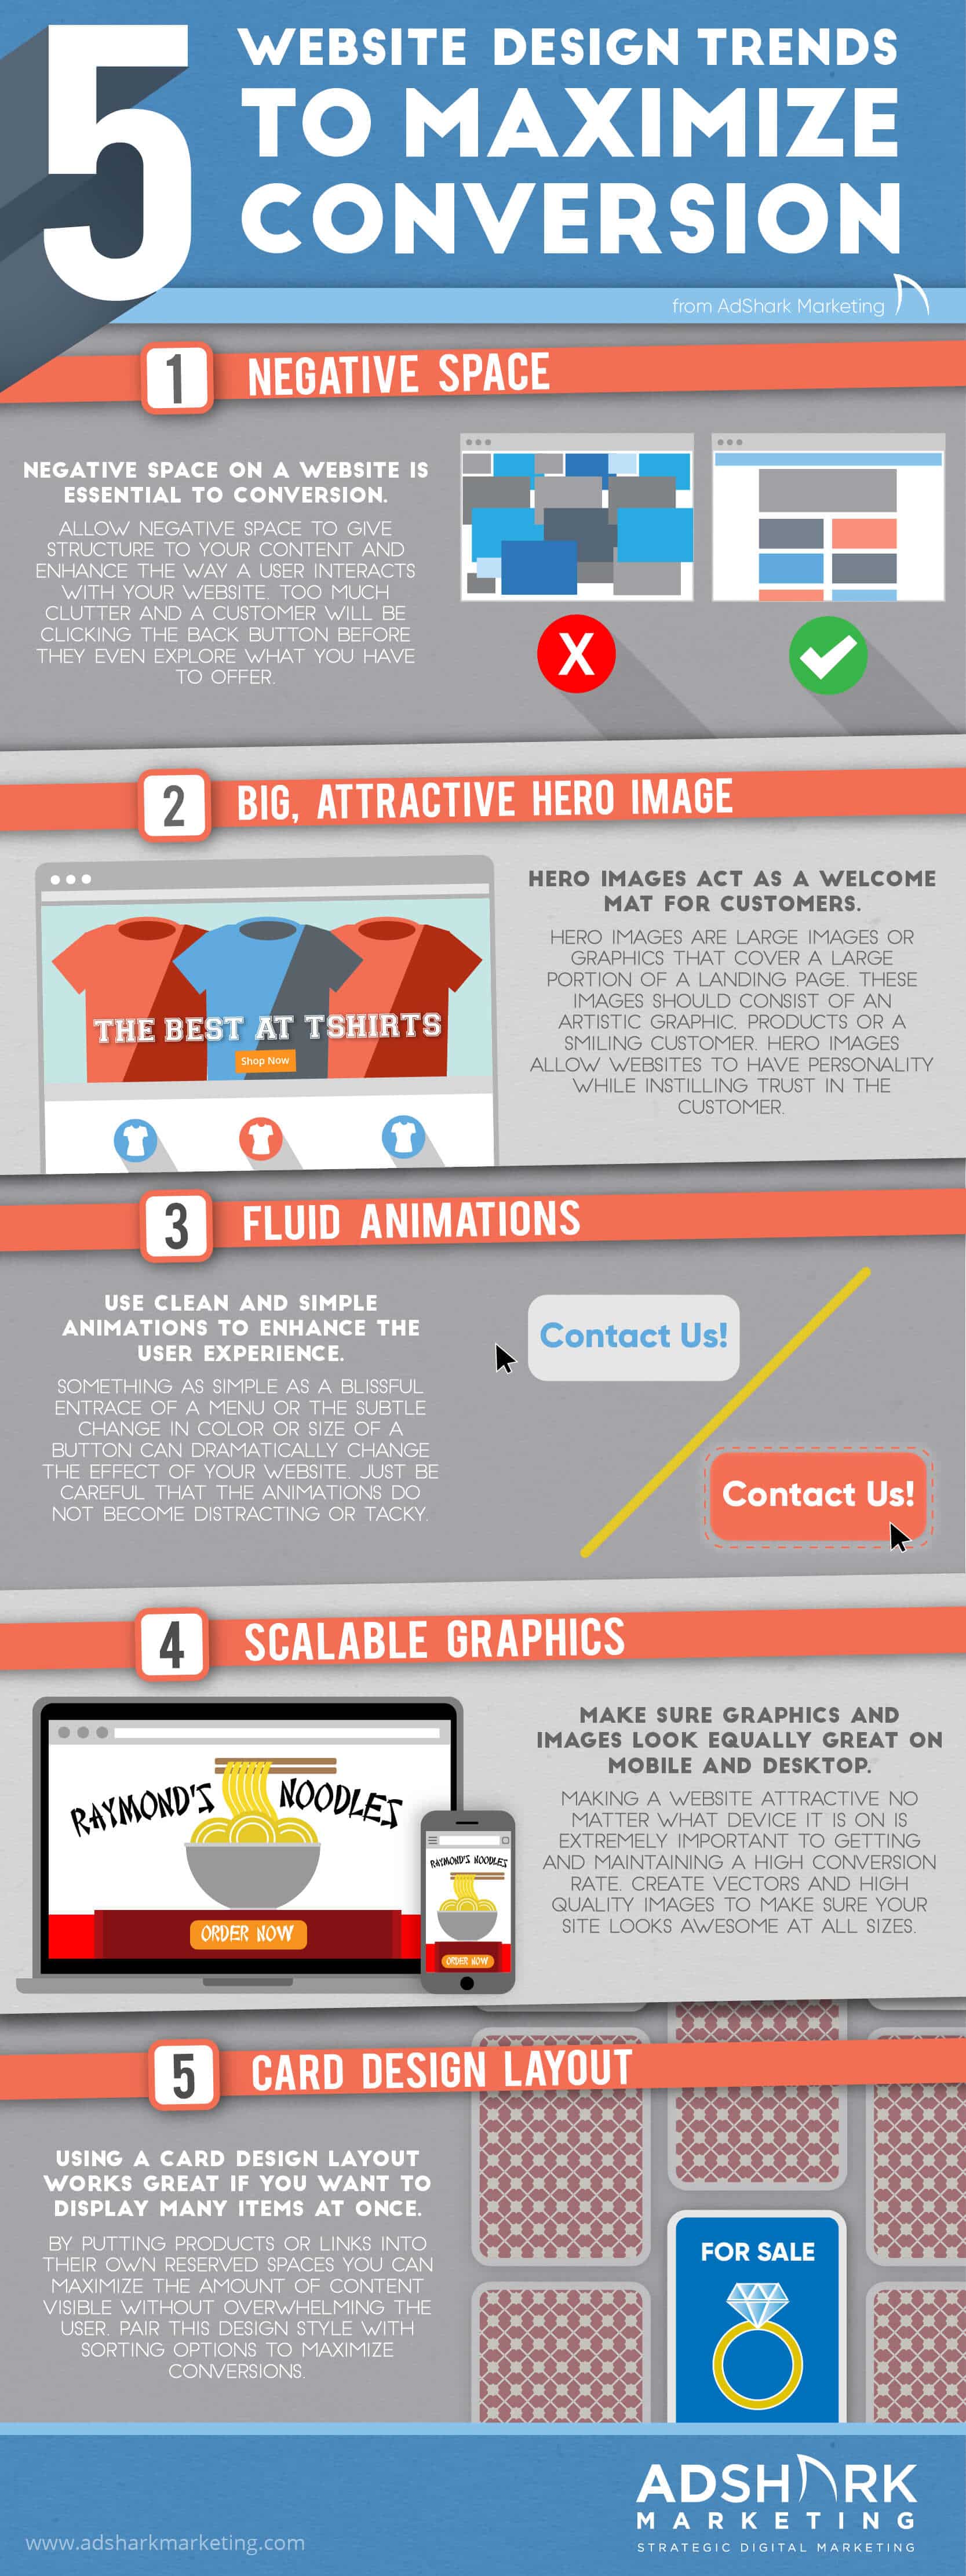 5 Website Design Trends to Maximize Conversion Infographic